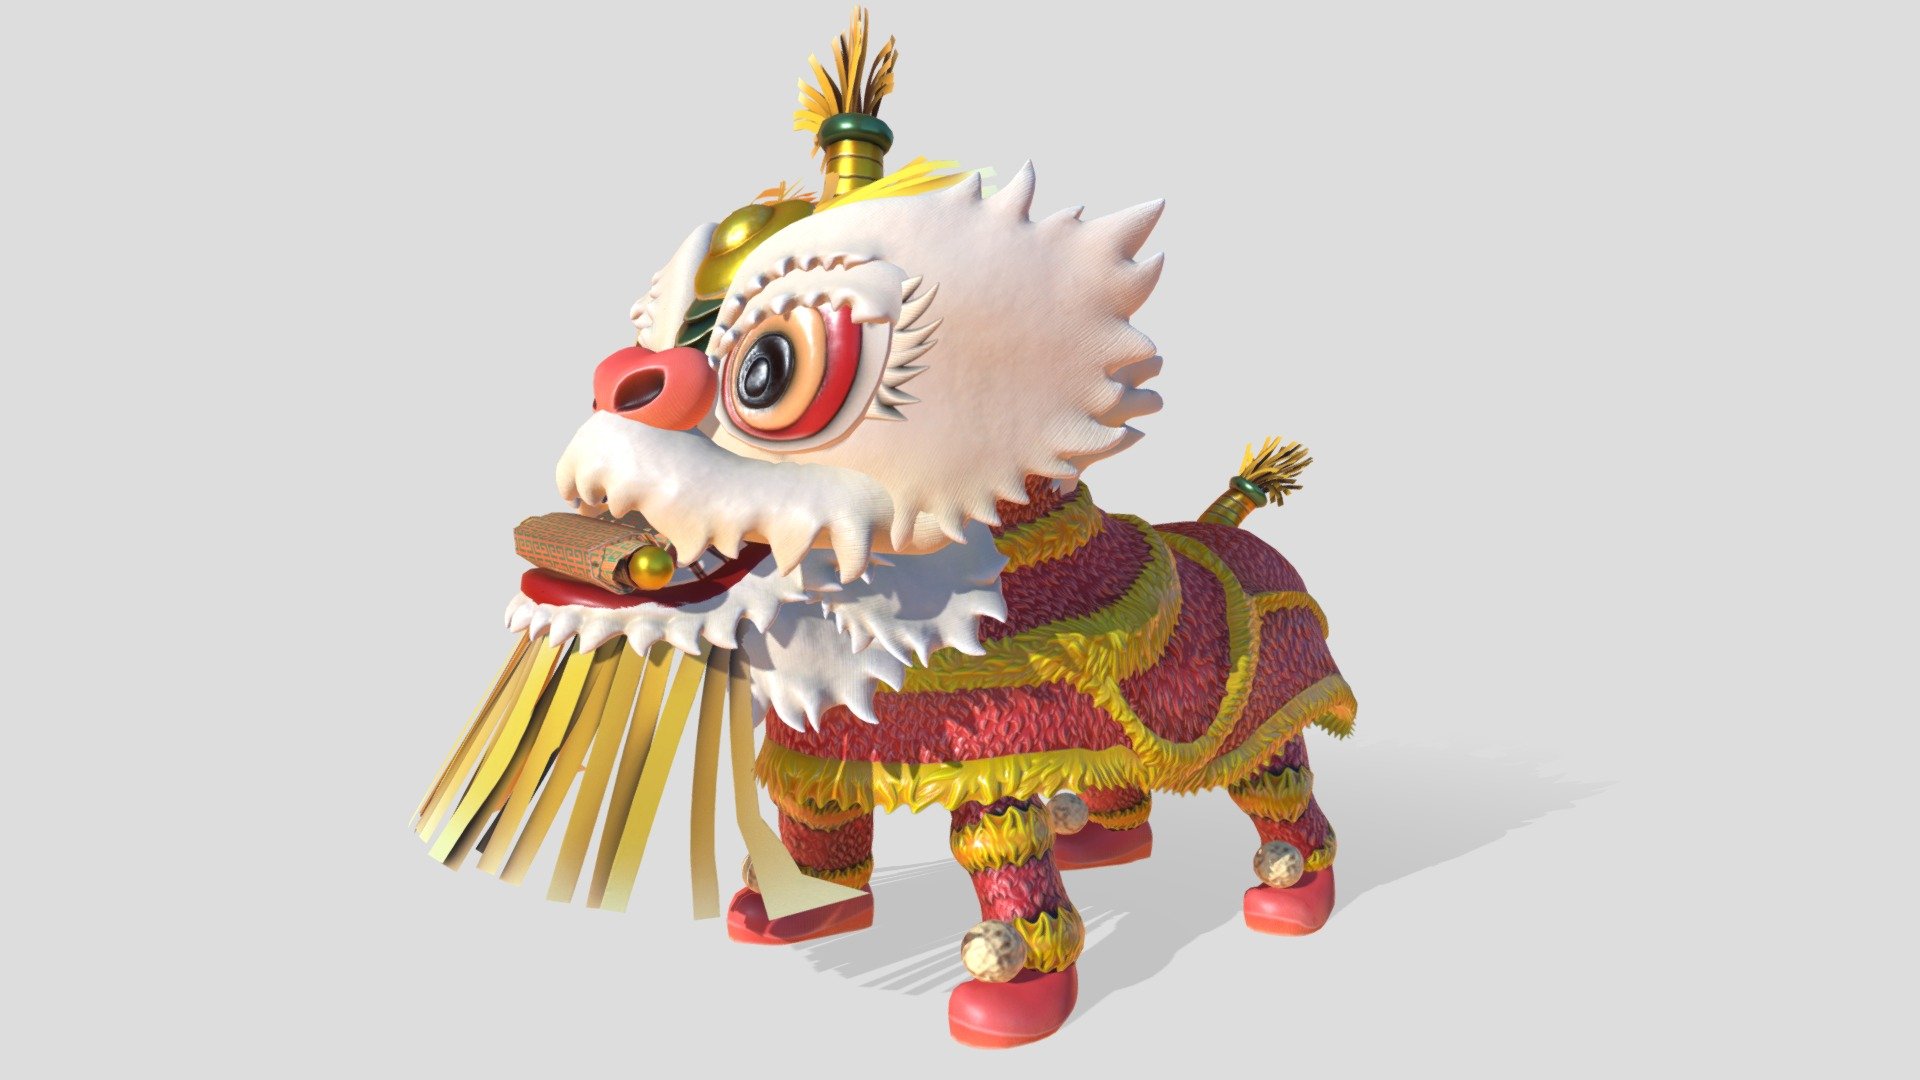 Stylised Chinese lion dance
Animations included: Dancing (Loop)

Login to STB’s Tourism Information &amp; Services Hub for free downloads:
https://tih.stb.gov.sg/content/tih/en/marketing-and-media-assets/digital-images-andvideoslisting/digital-images-and-videos-detail.104554e22c0093d4a70a49d0edea206e72e.Lion+Dance.html - Lion Dance - 3D model by STB-TC 3d model